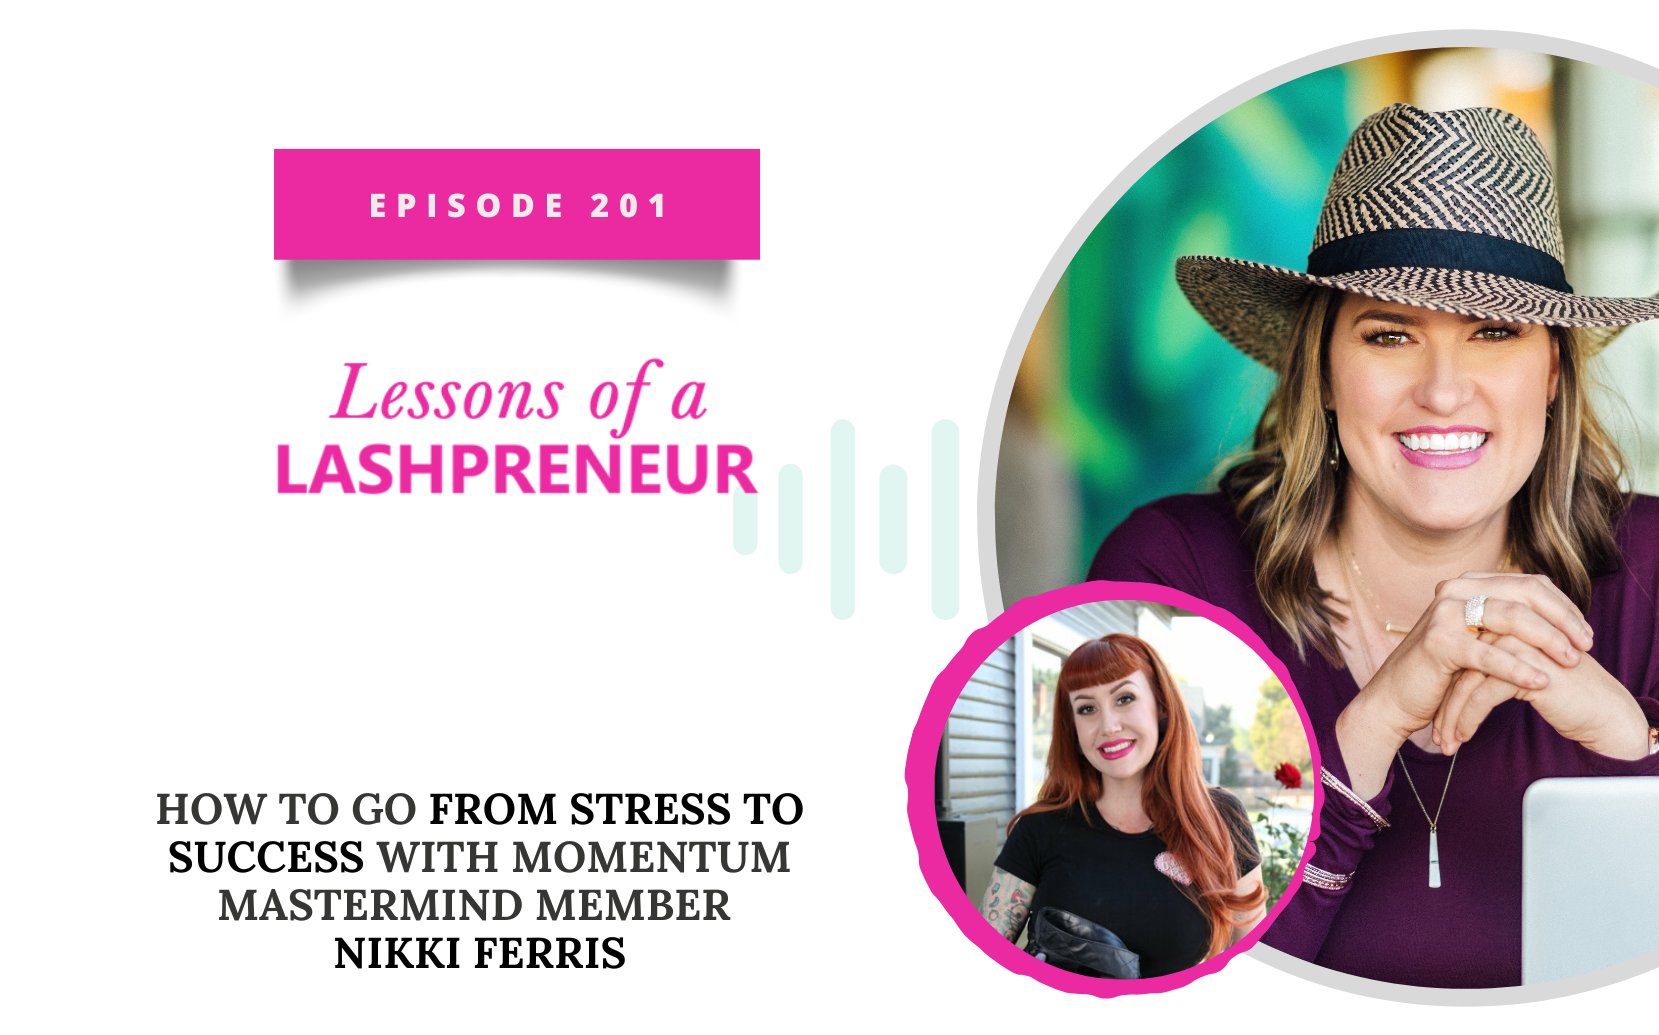 How To Go From STRESS to SUCCESS with Momentum Mastermind Member Nikki Ferris